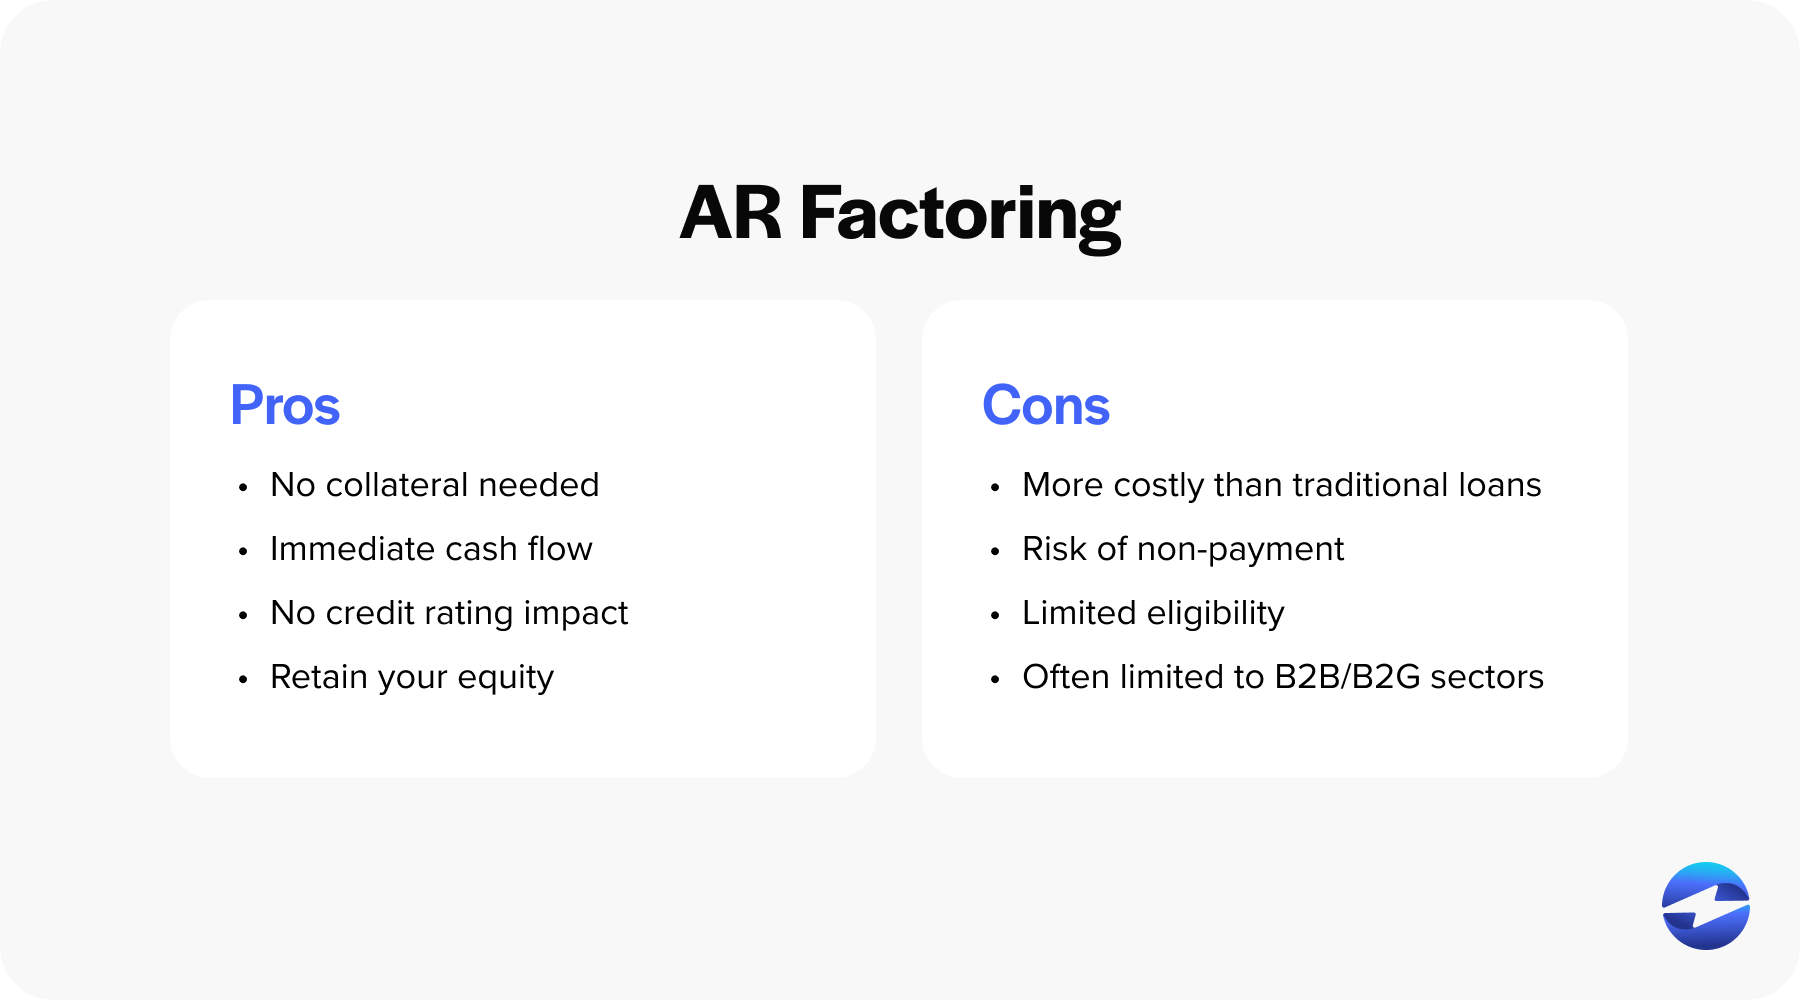 pros and cons of ar factoring 